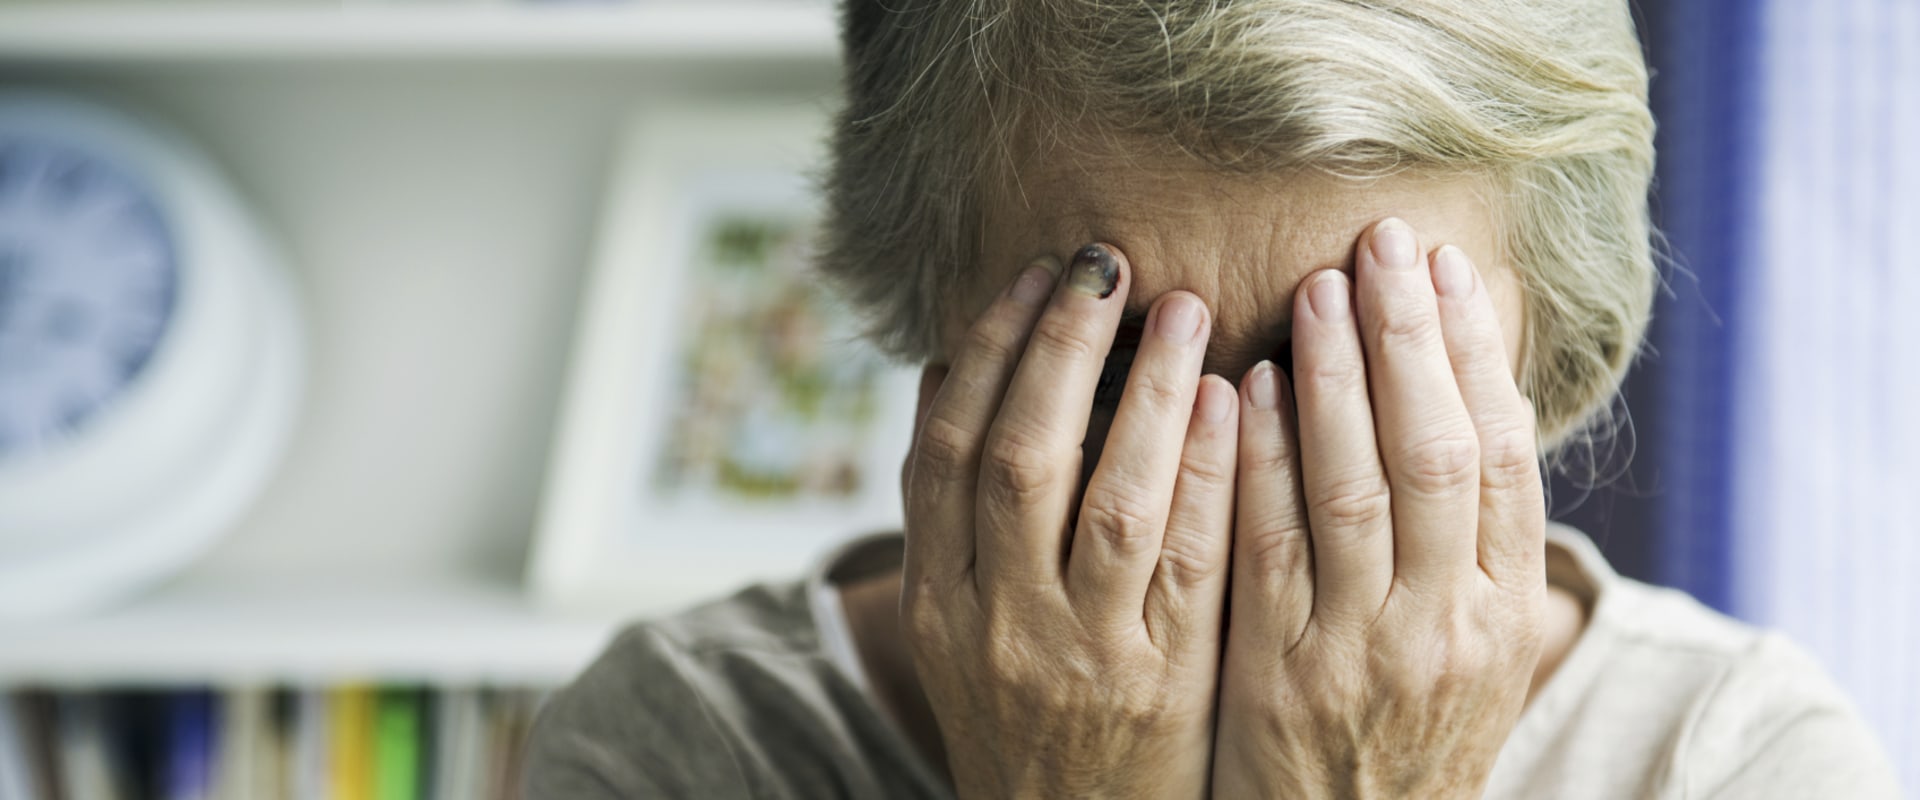 What are elder abuse laws?